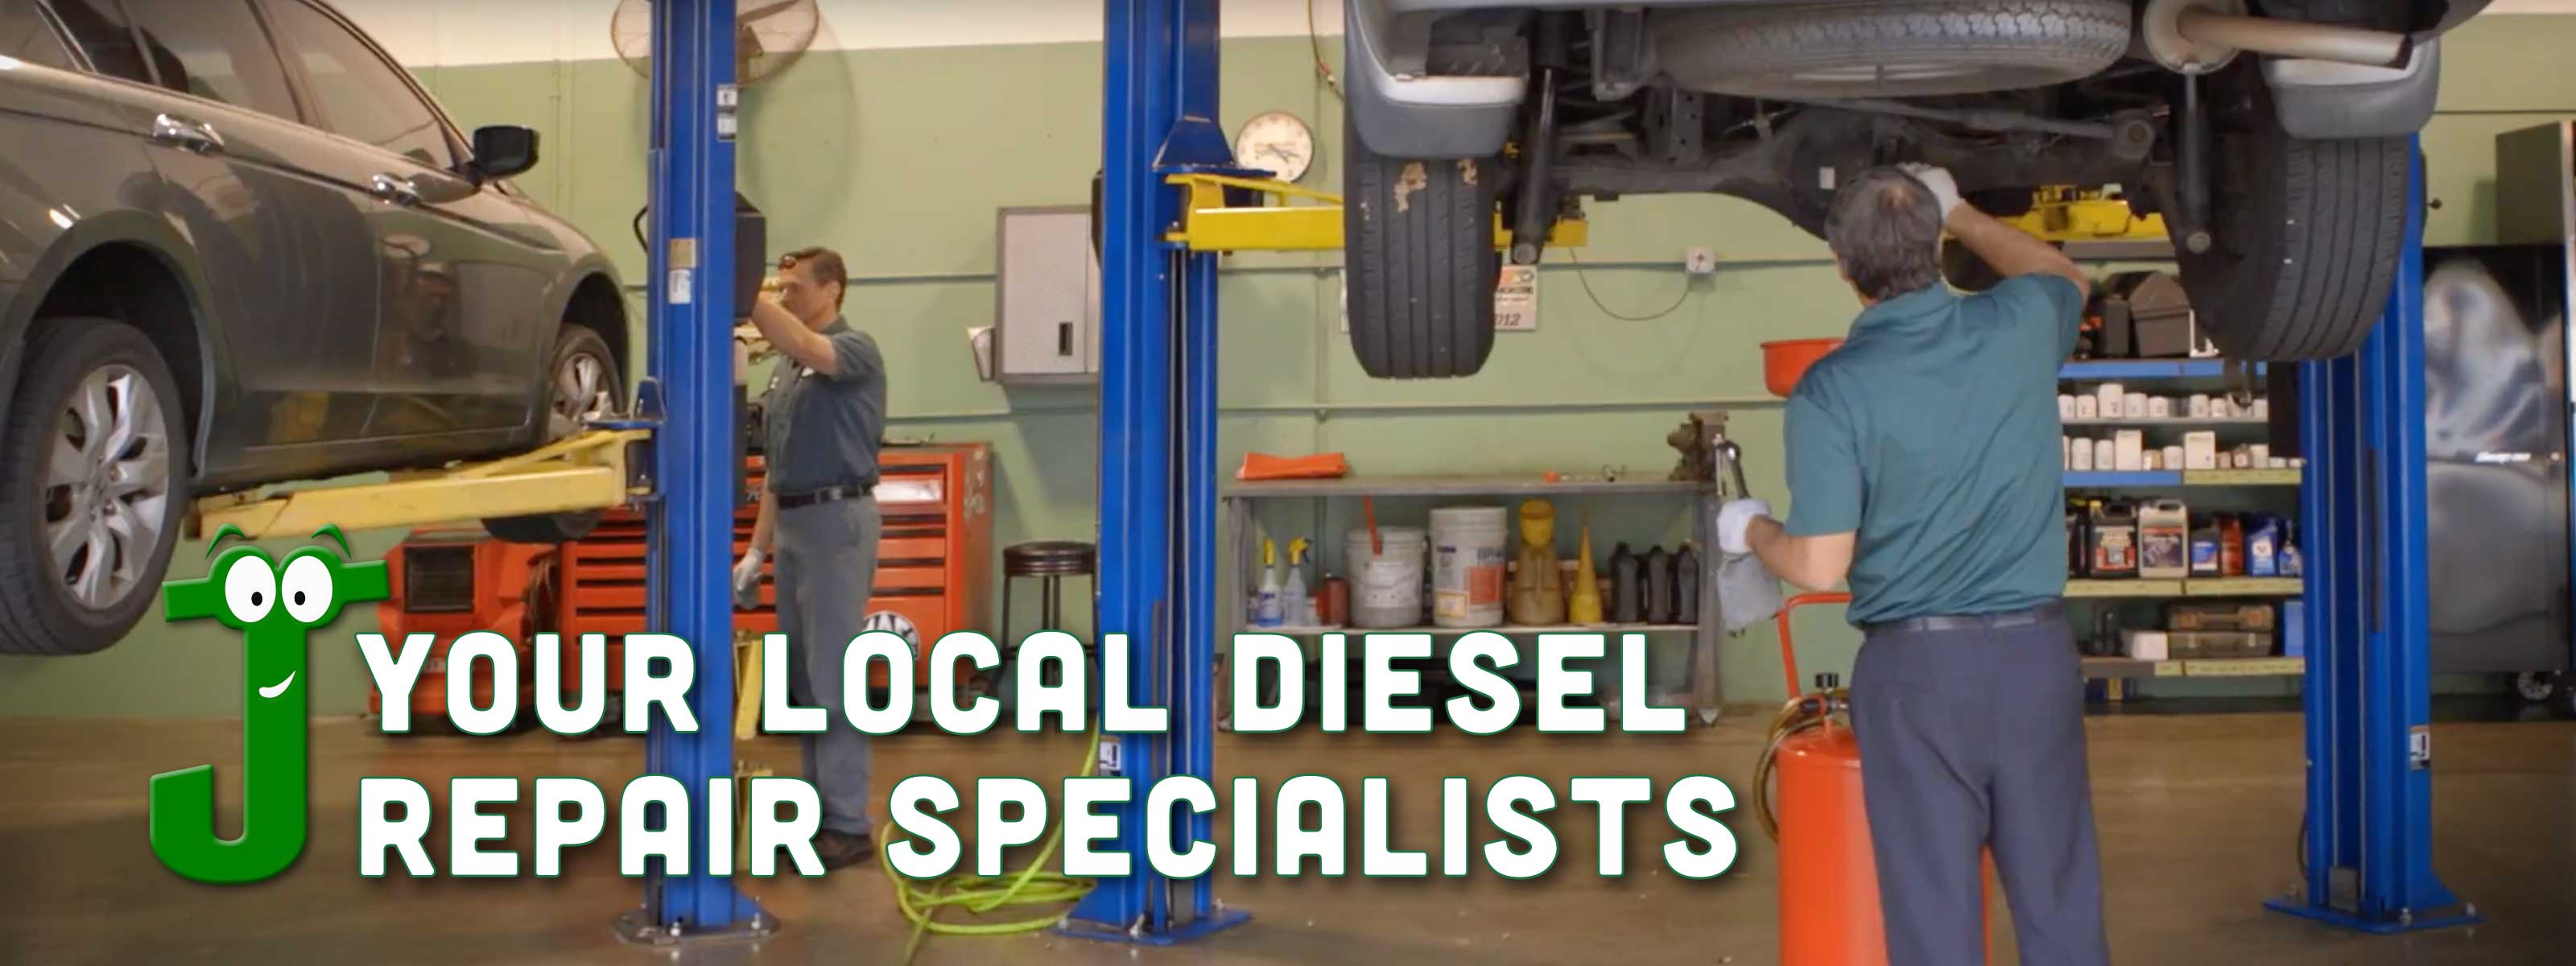 Your local diesel repair specialists